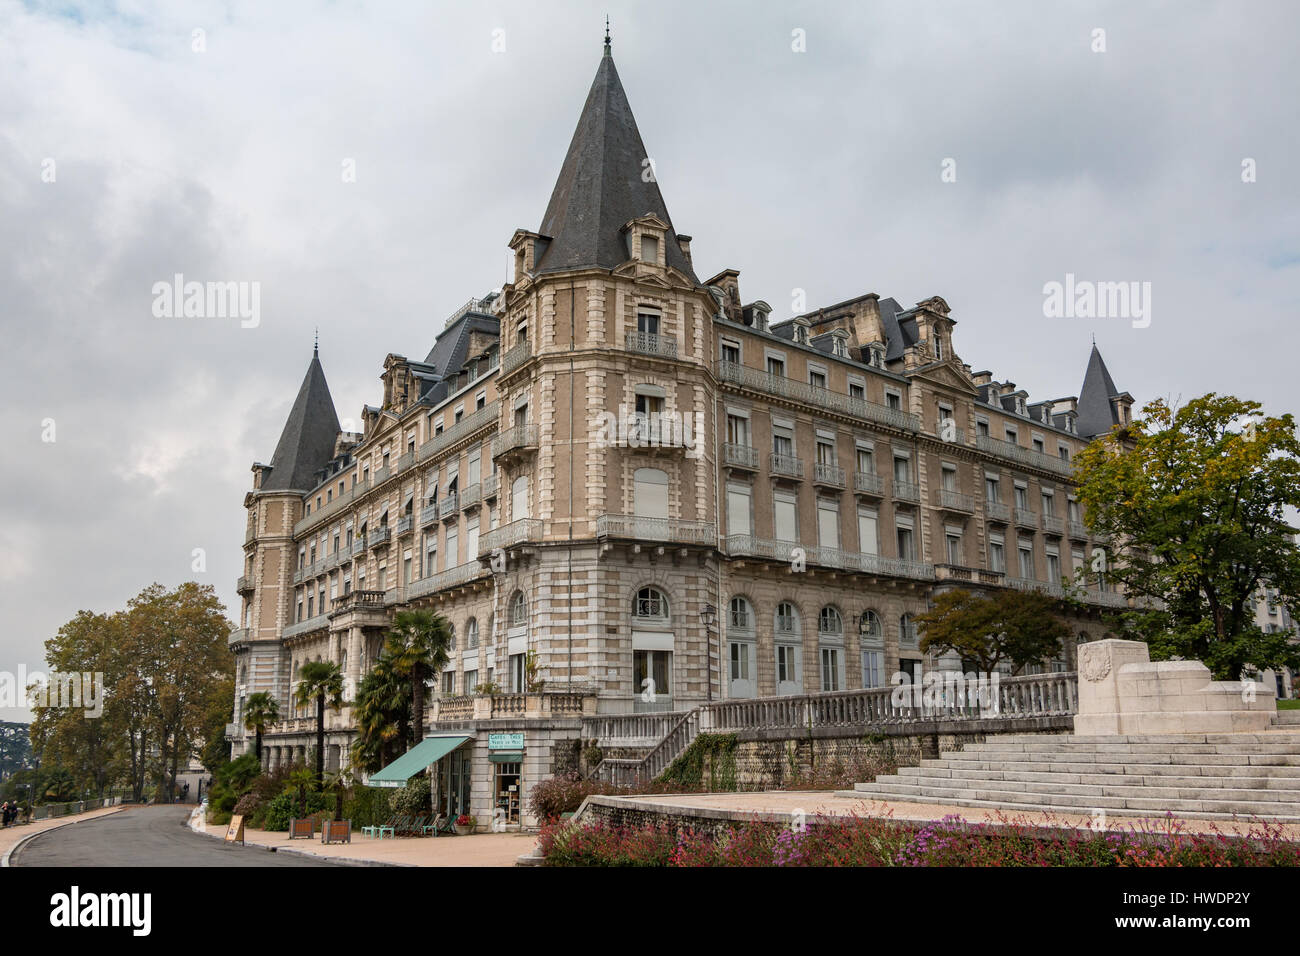 The Gassion Hotel in Pau, France on a cloudy autumn day Stock Photo